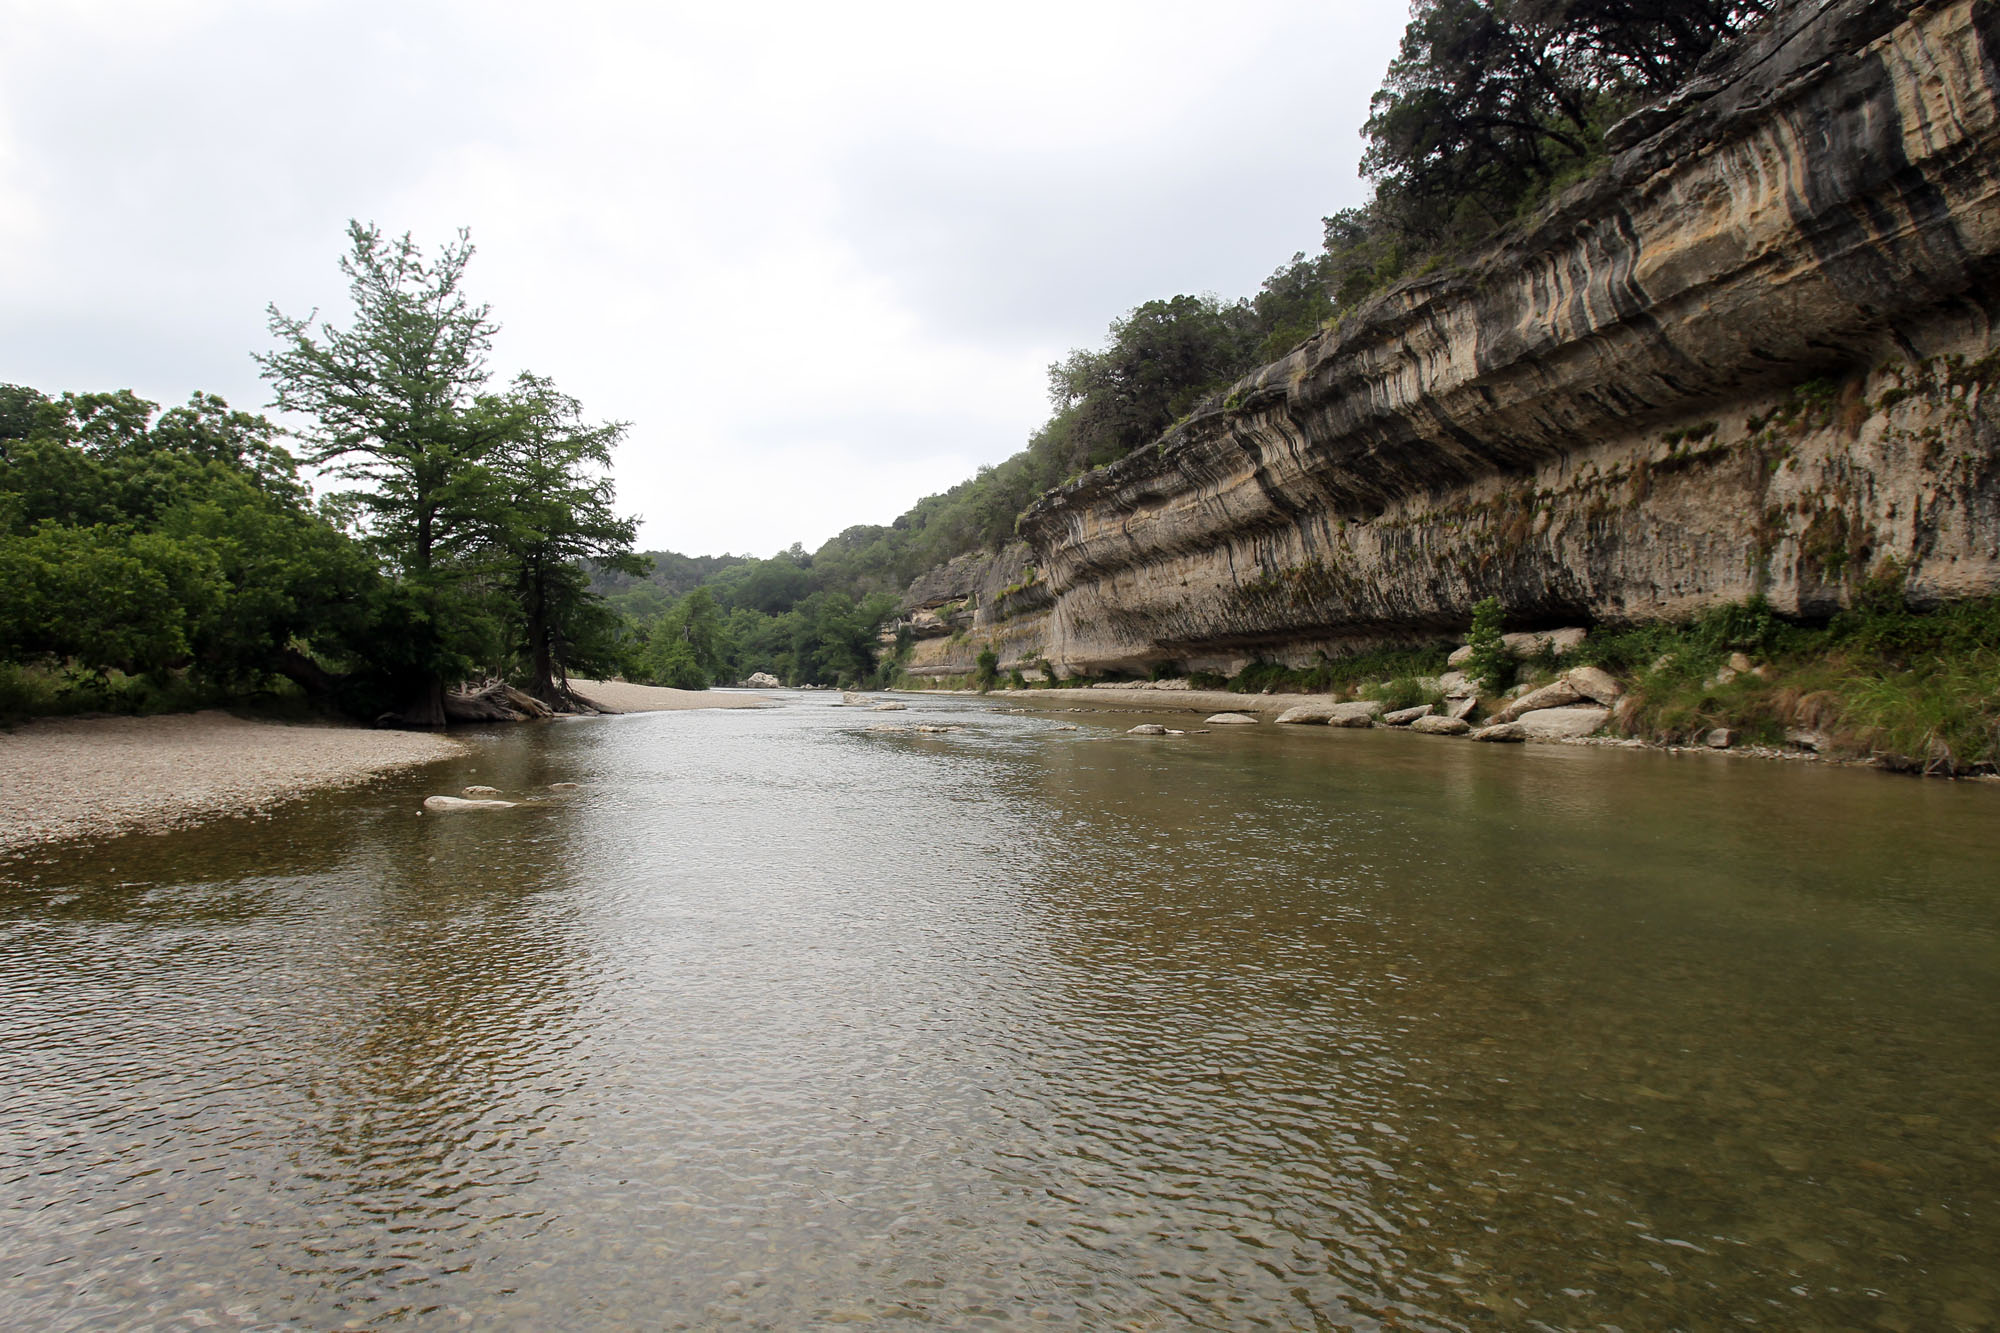 15 state parks worth the day trip from San Antonio